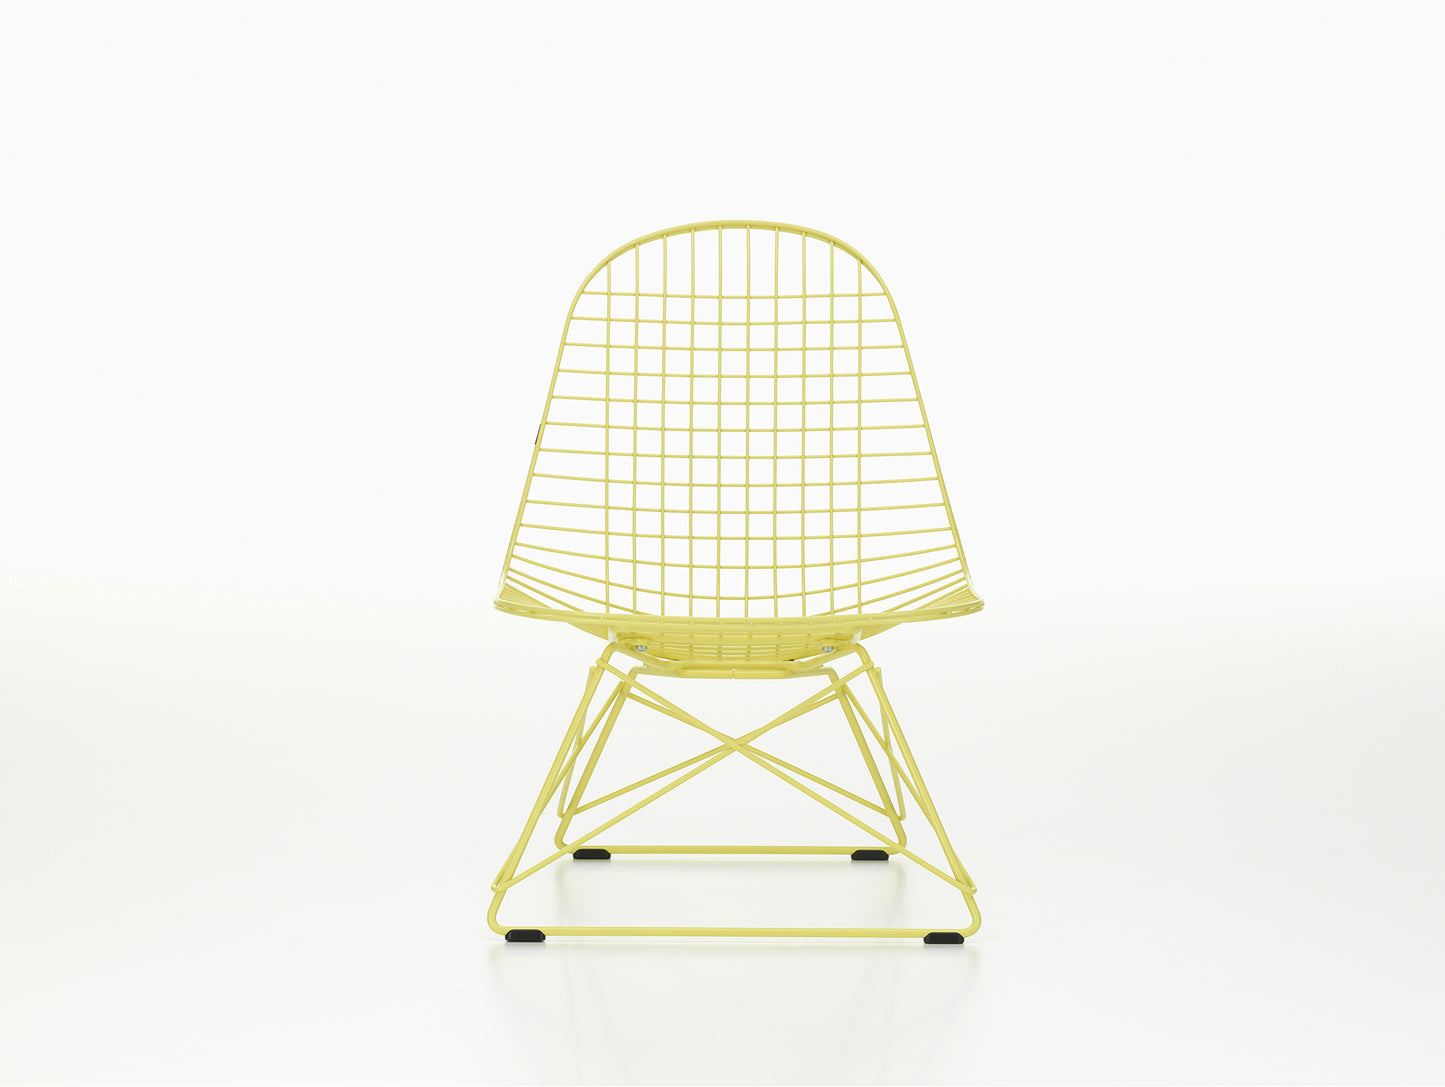 Eames LKR Wire Chair by Vitra - Citron Powder-Coated Steel